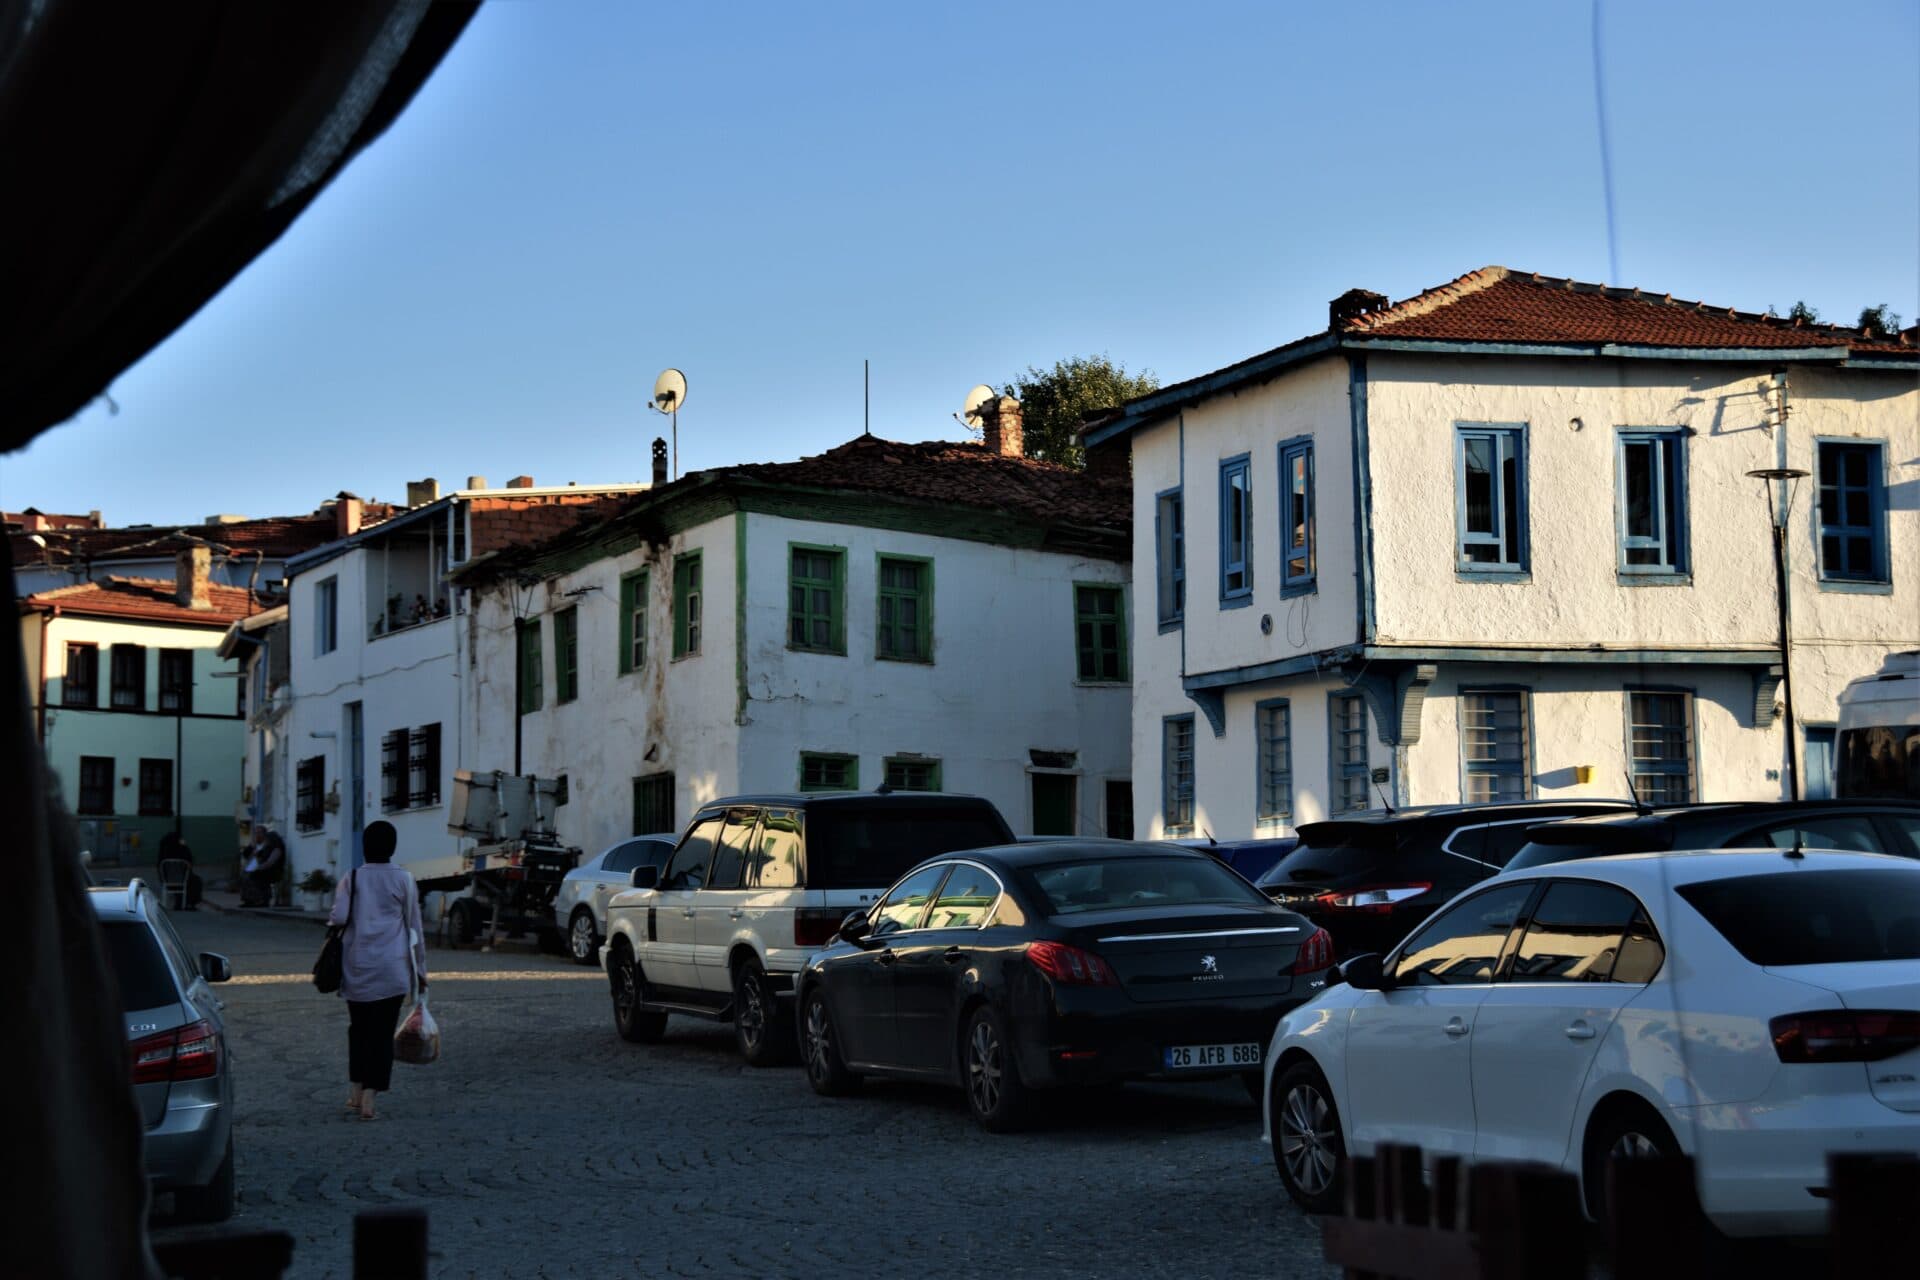 a woman walks between parking cars towards whitewashed buildings boasting blue and green coloured window and door frames